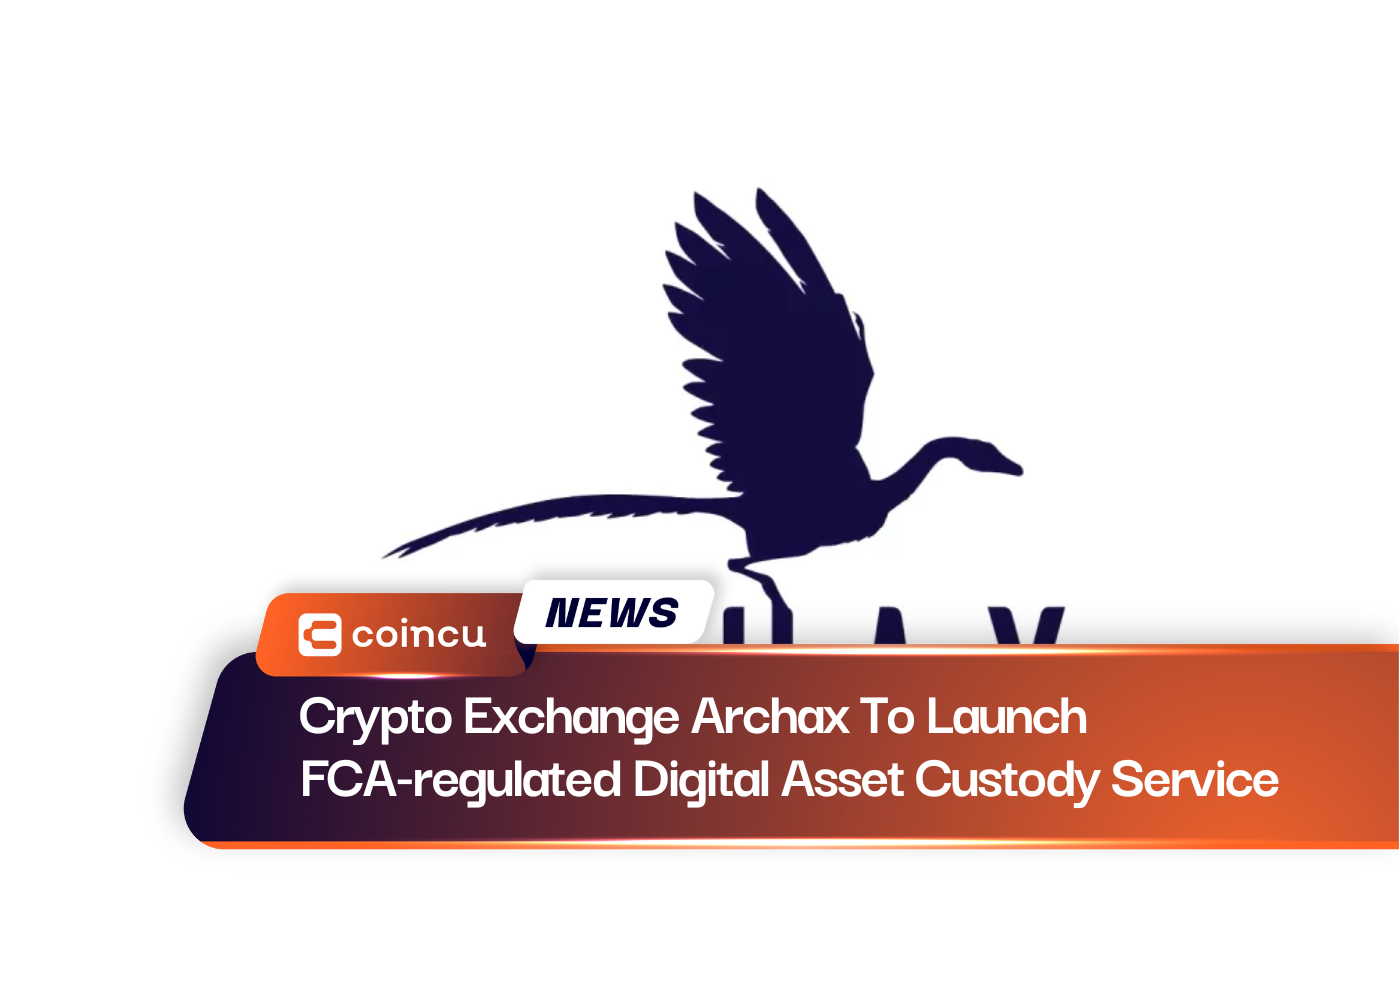 Crypto Exchange Archax To Launch FCA-regulated Digital Asset Custody Service